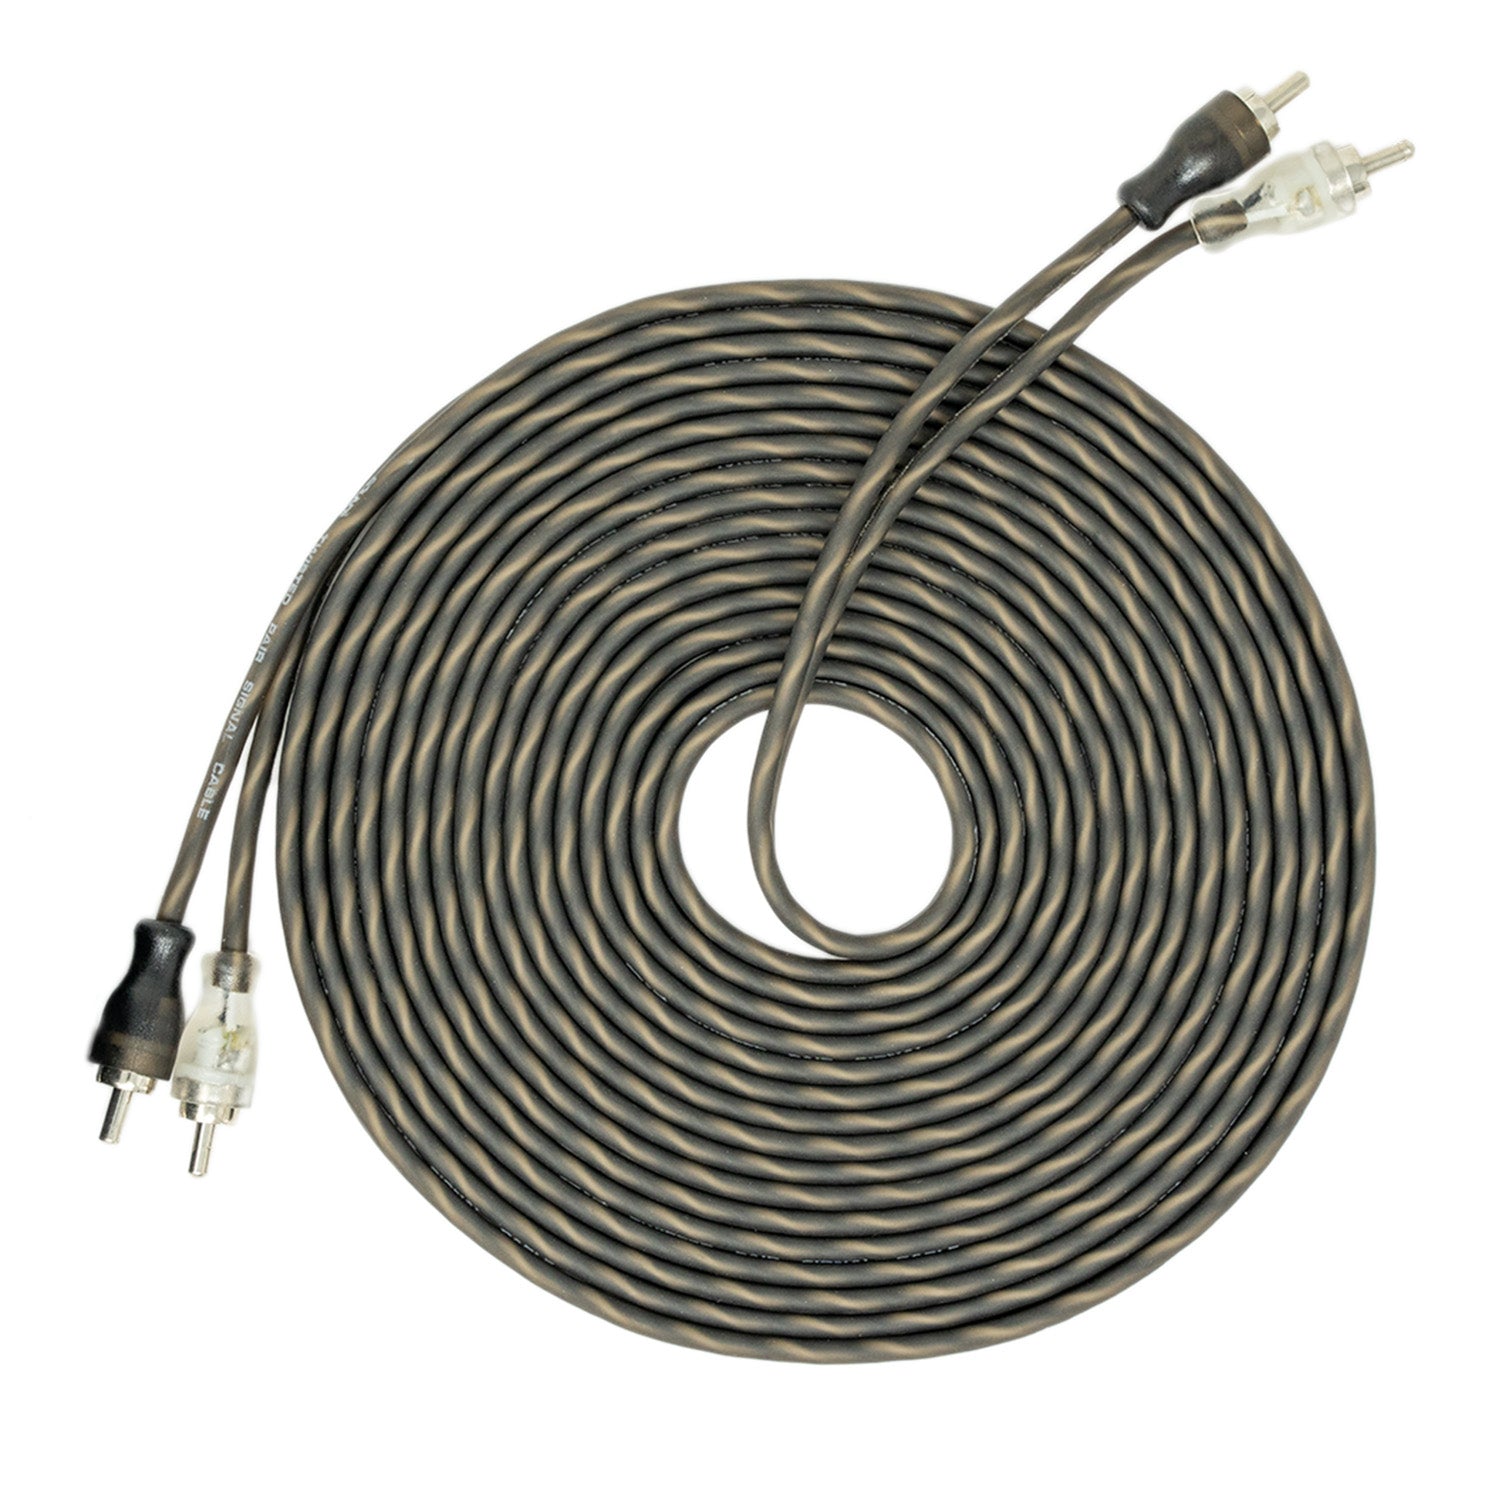 SoundBox LC-T22, Twisted Pair RCA Interconnect Cable, 22 Ft. - (Polybag Packaging)